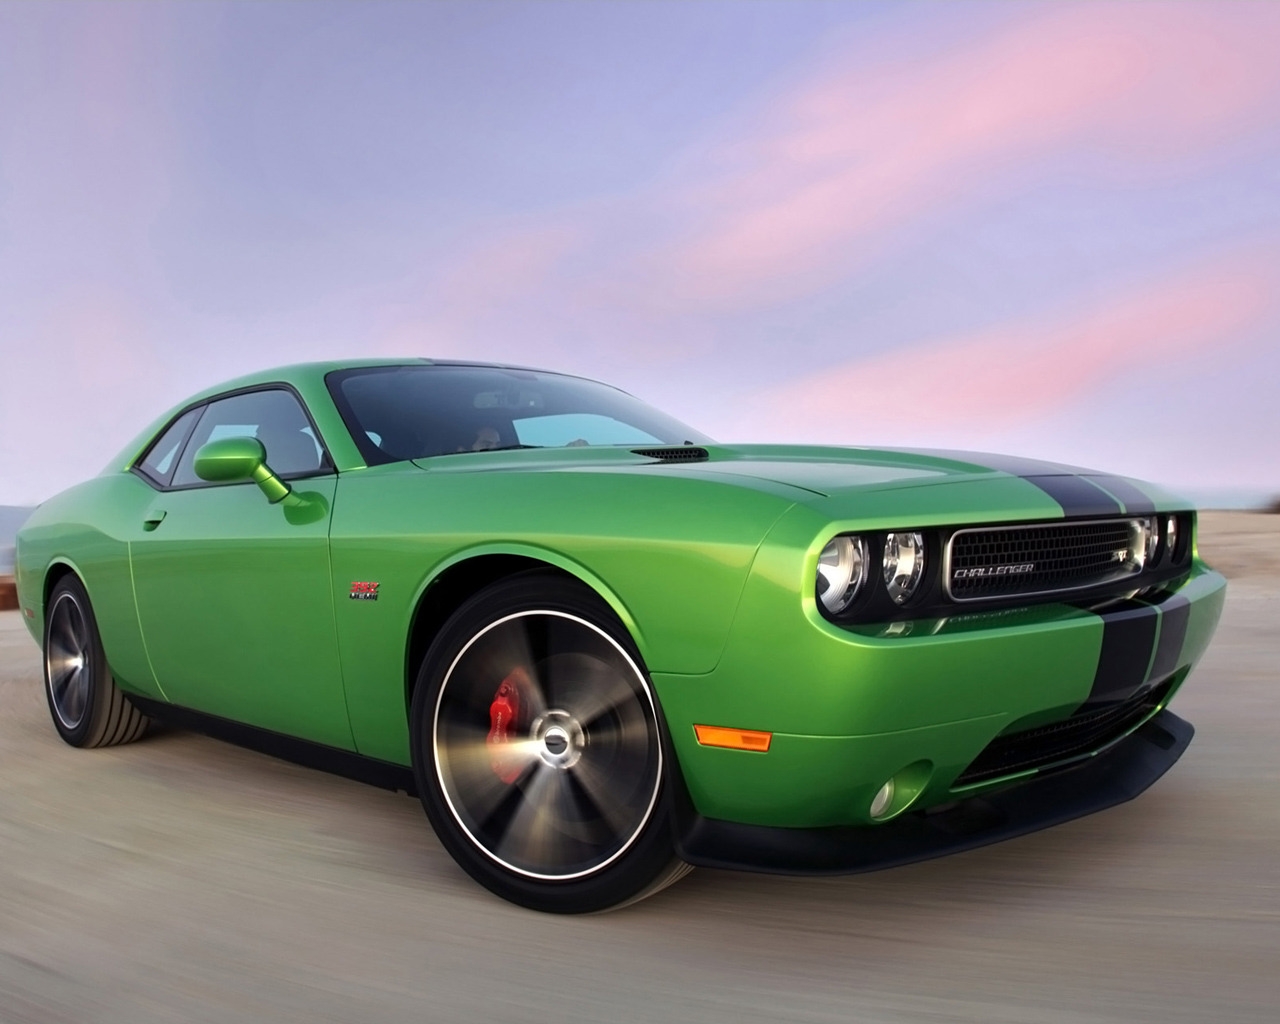 2011 Dodge Challenger Green for 1280 x 1024 resolution